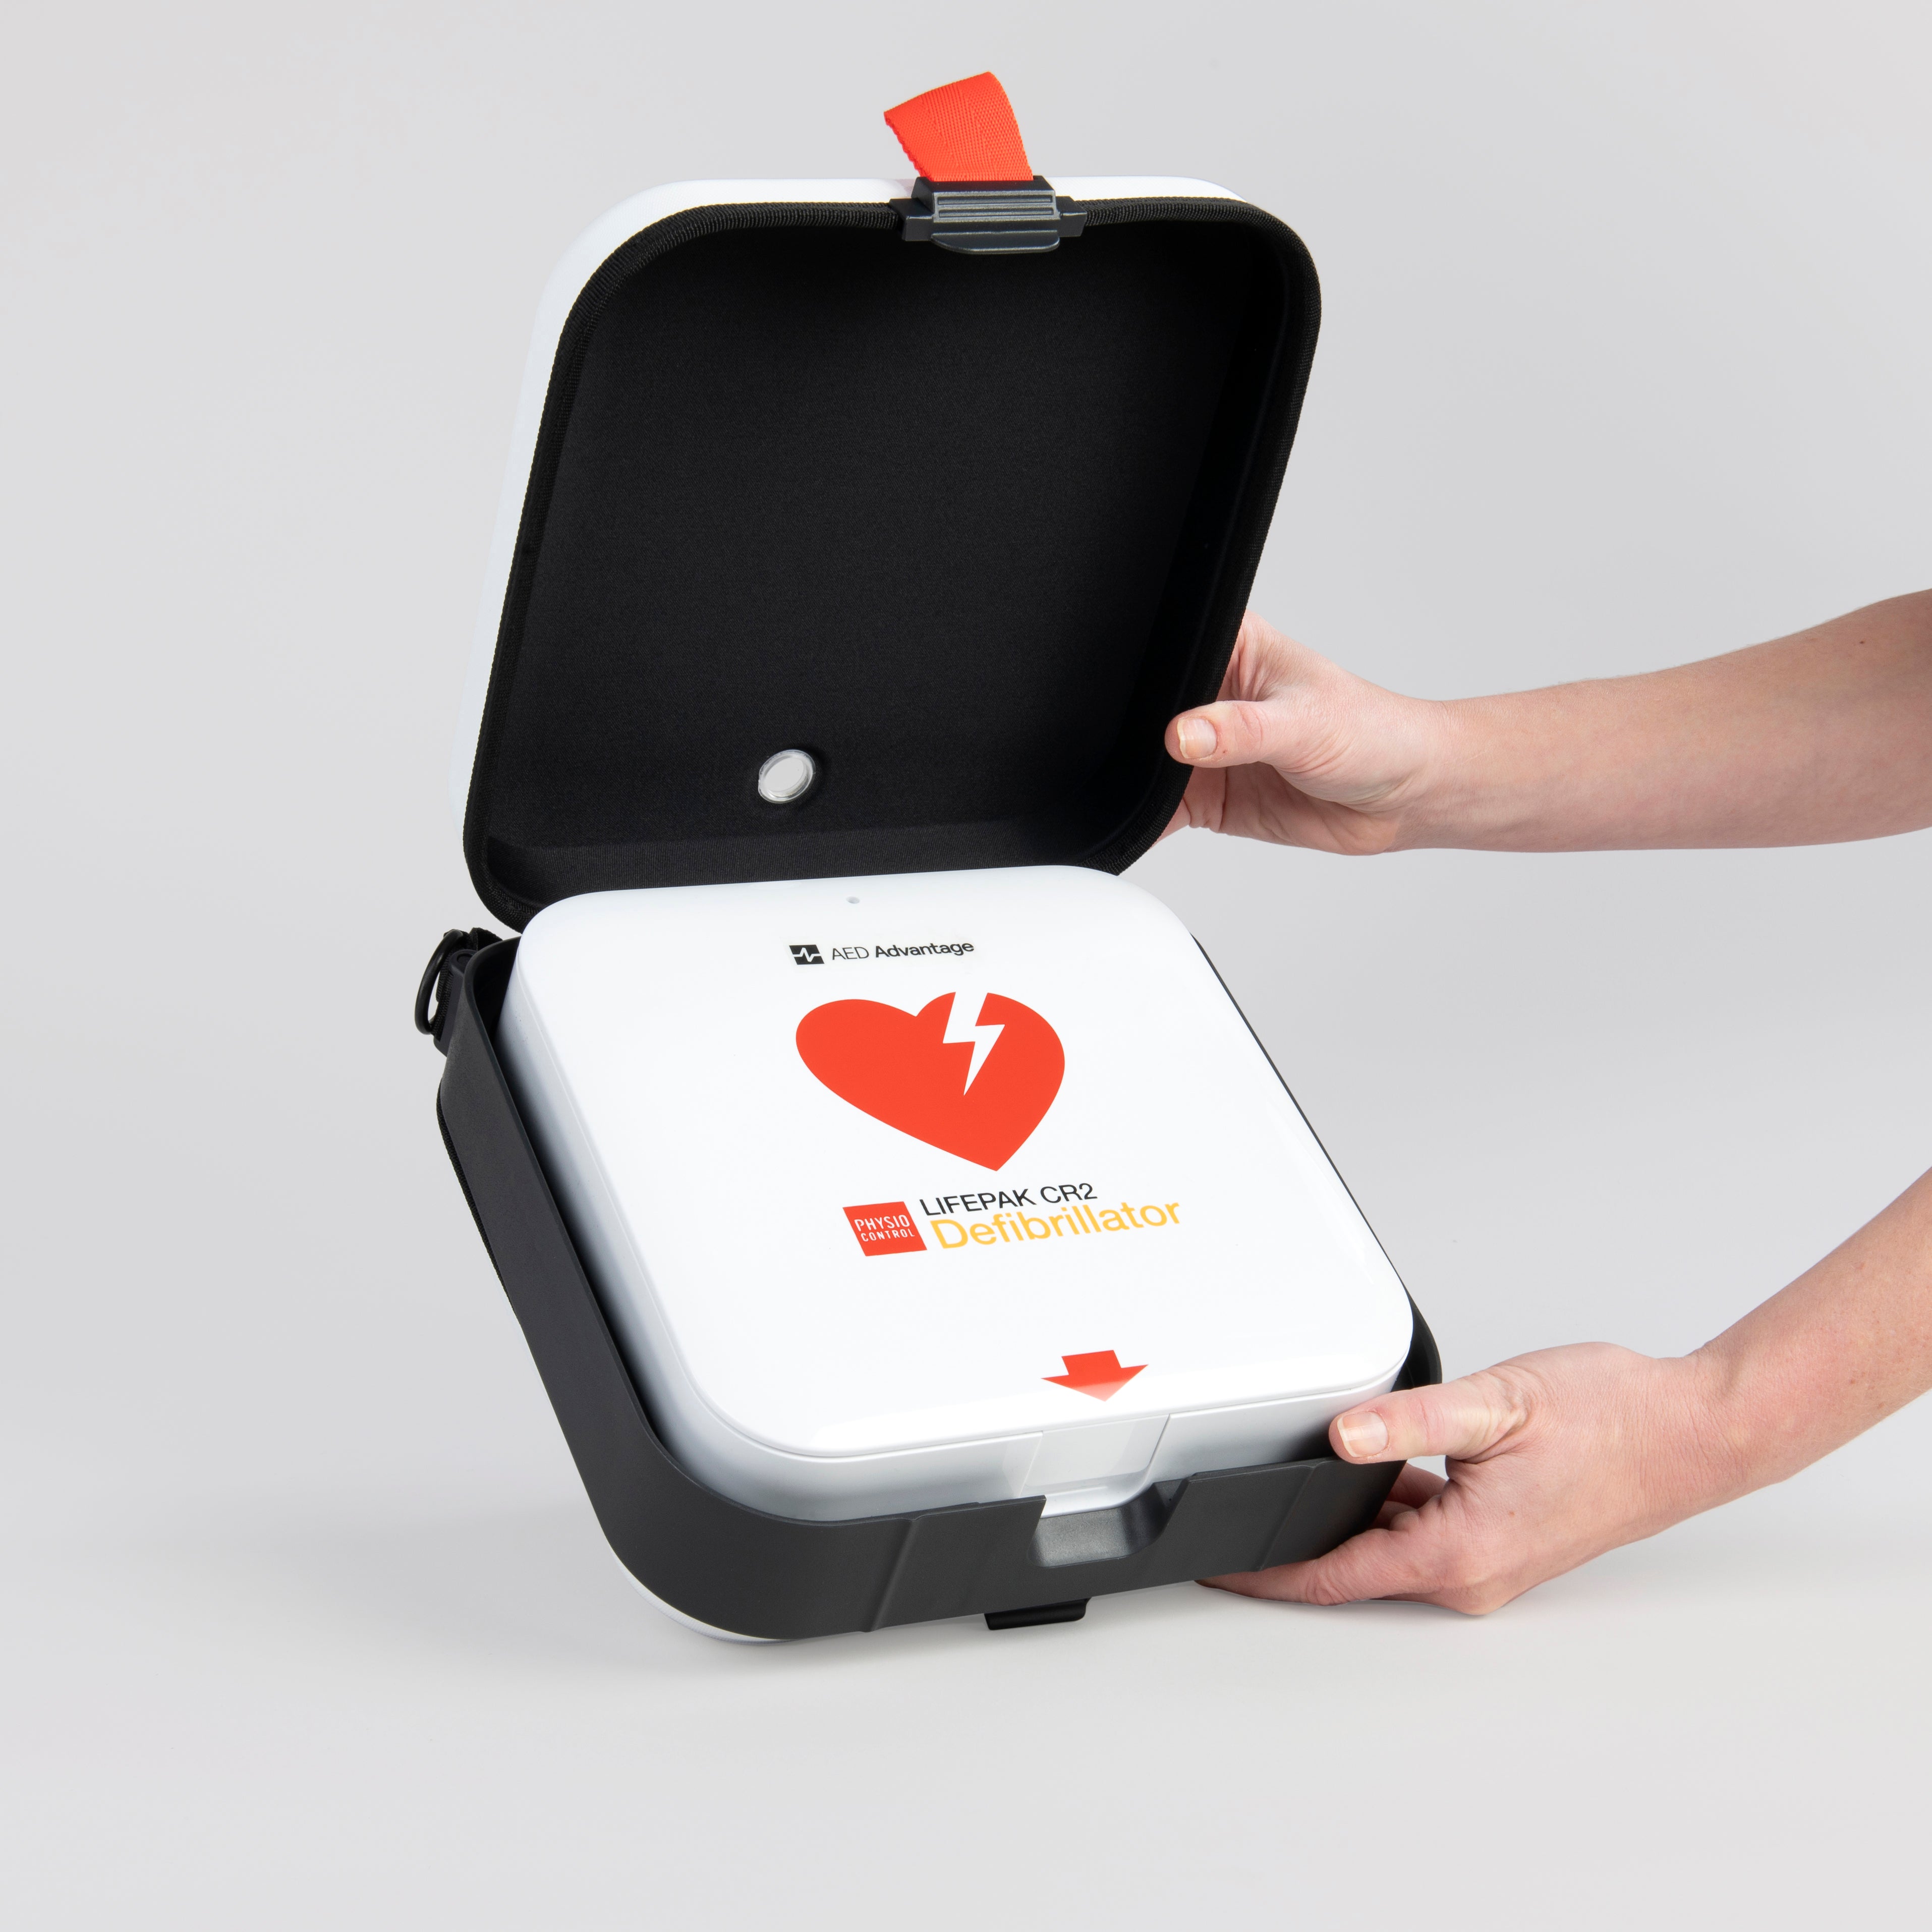 A white and red AED's carry case being opened by hand